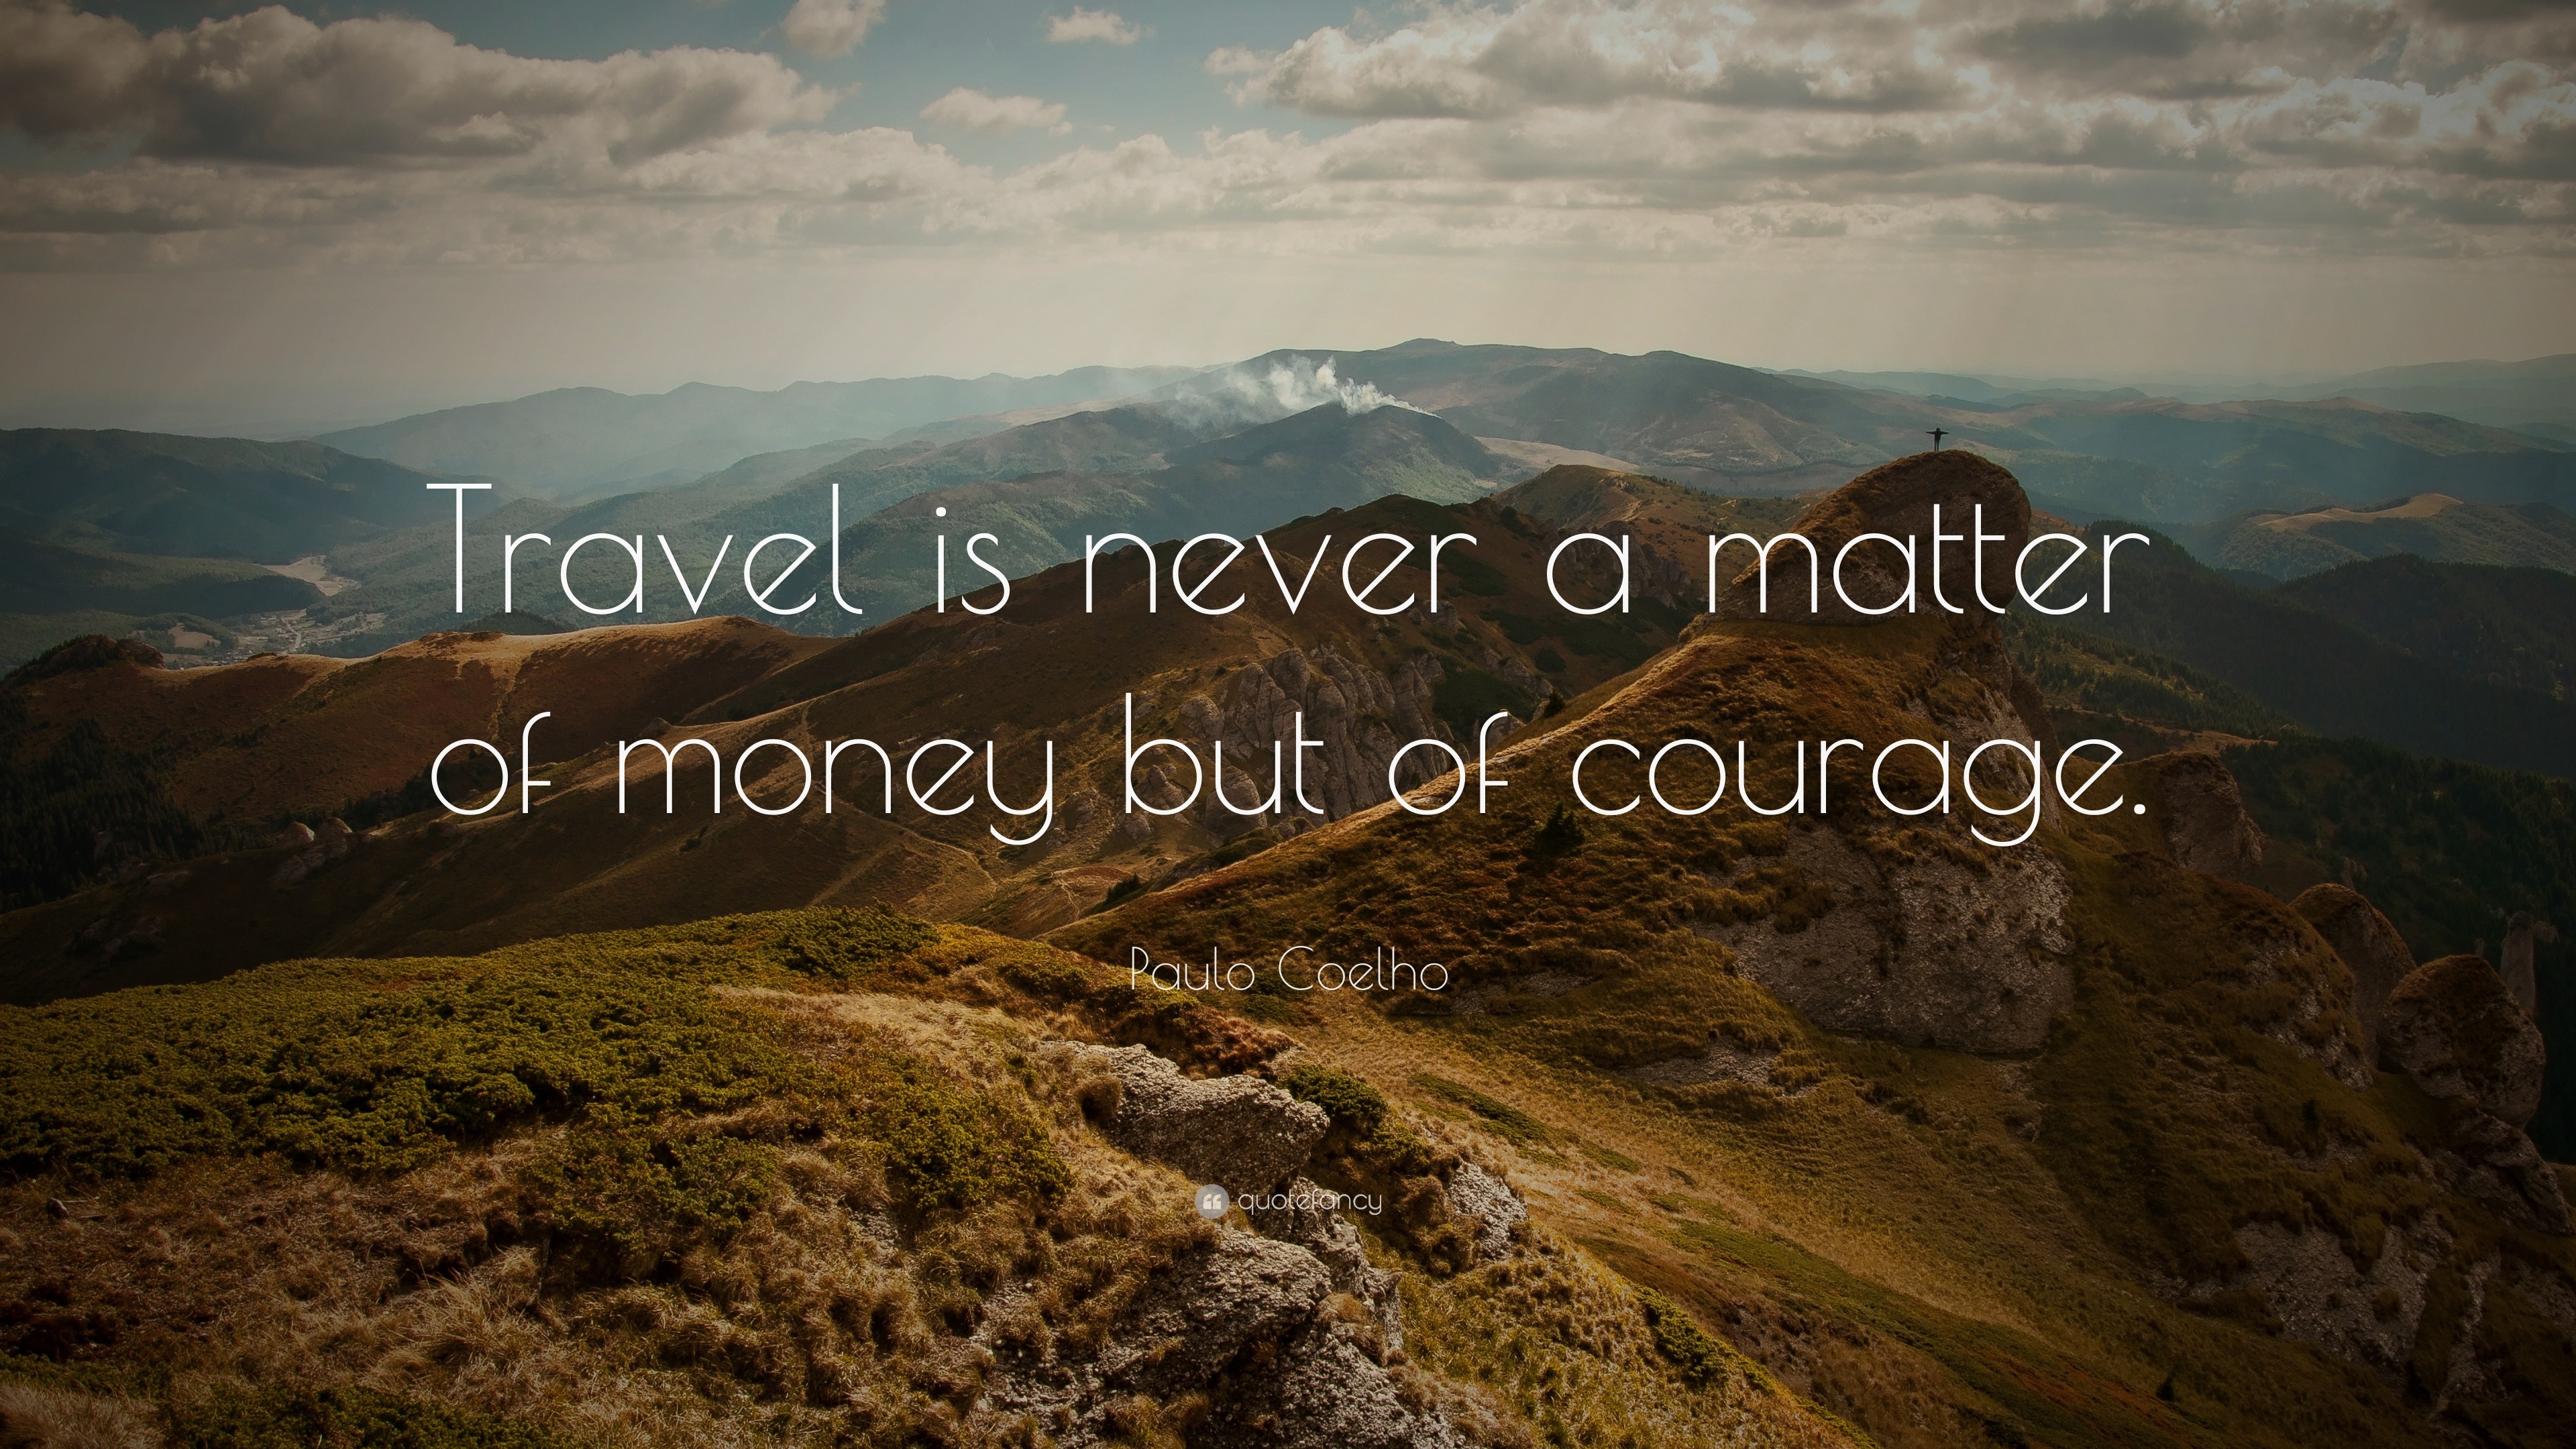 Paulo Coelho Quote “Travel is never a matter of money but of courage